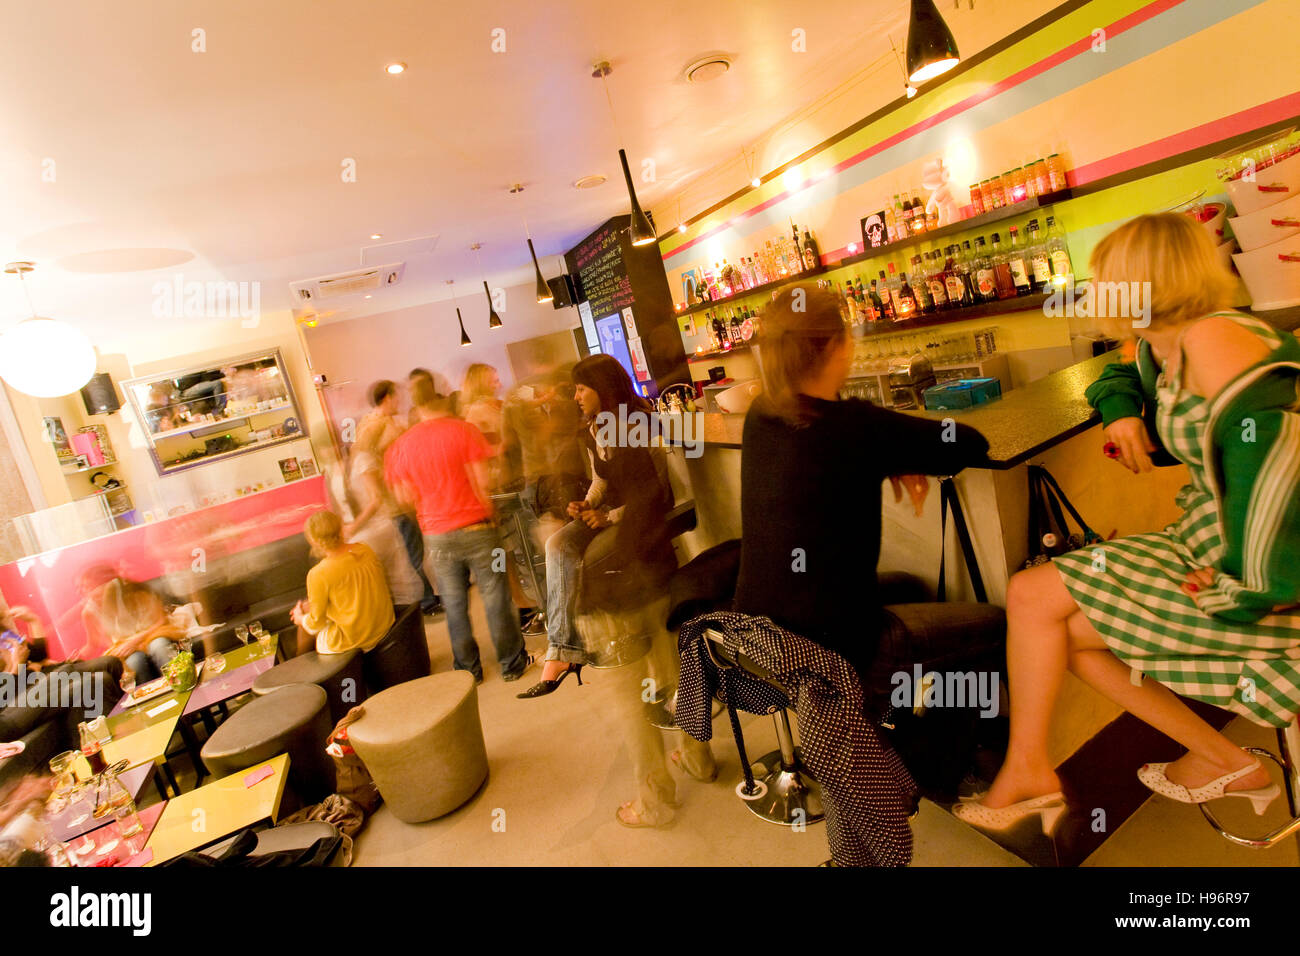 People in the Bliss Bar, lounge, scene, nightlife, Nice, Cote d'Azur, Provence, France Stock Photo